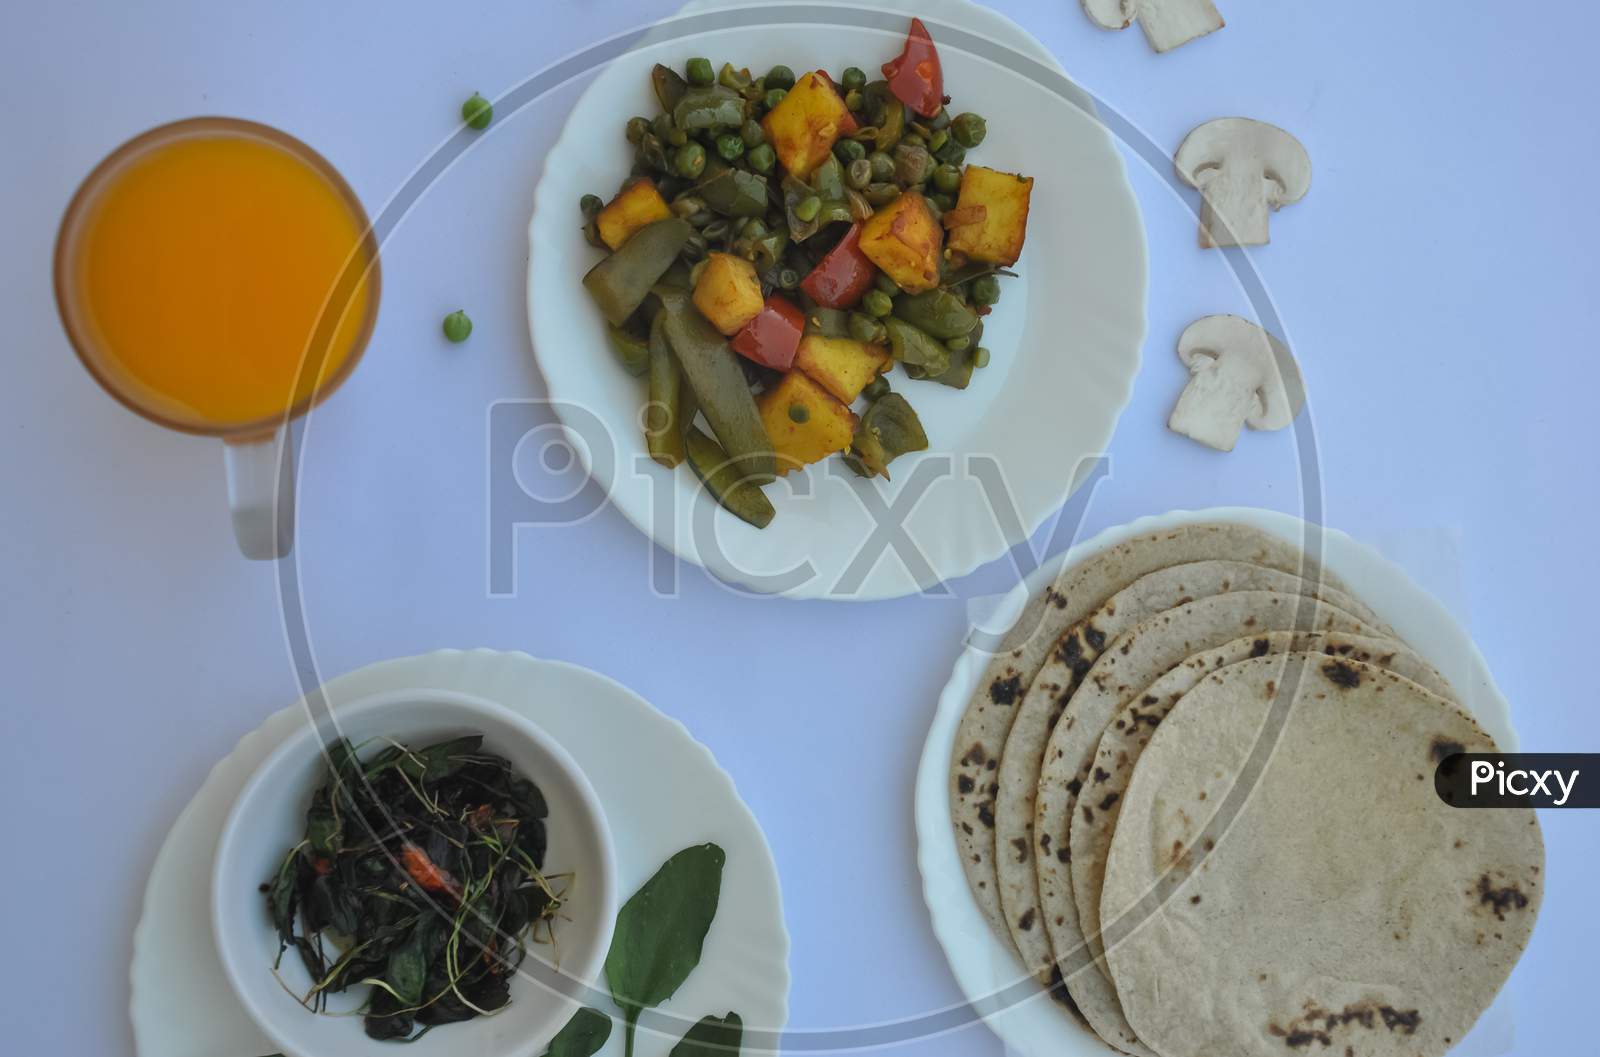 Overhead view of matar paneer mix veg, saag (greens), roti (chapati) and juice on glass isolated over white background